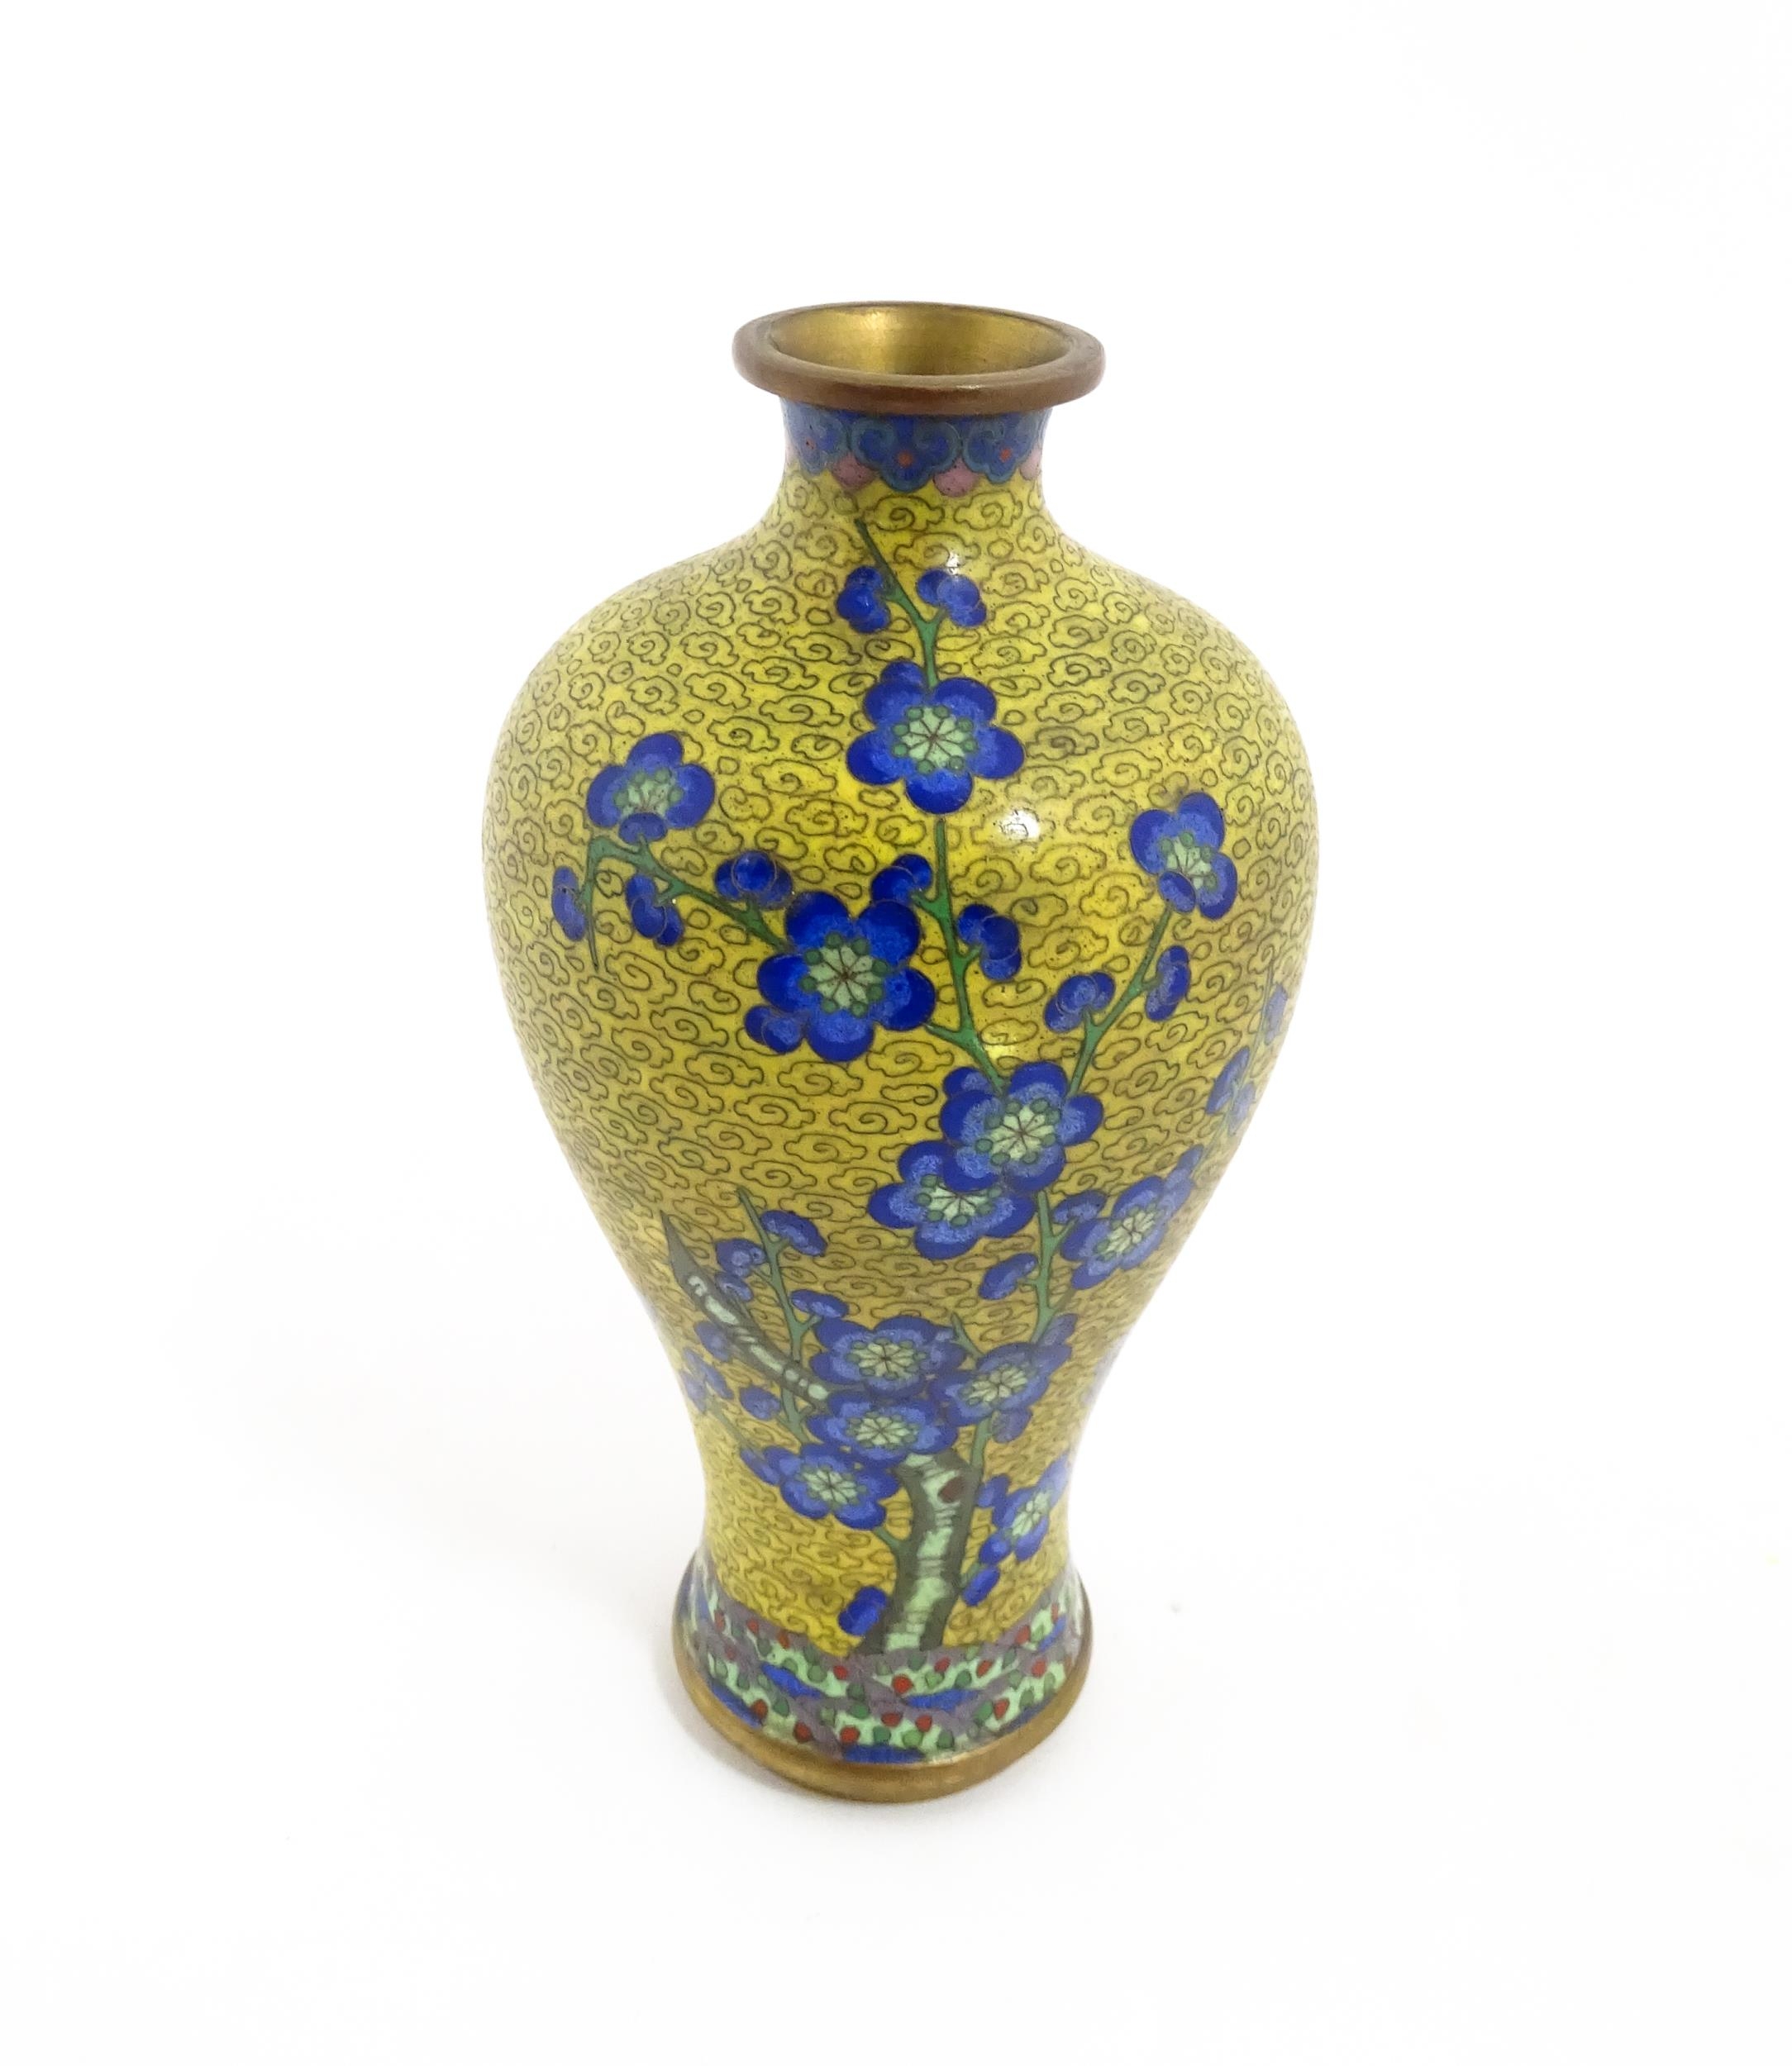 A Chinese cloisonne vase with a yellow ground decorated with blue prunus flowers / blossom. - Image 5 of 7